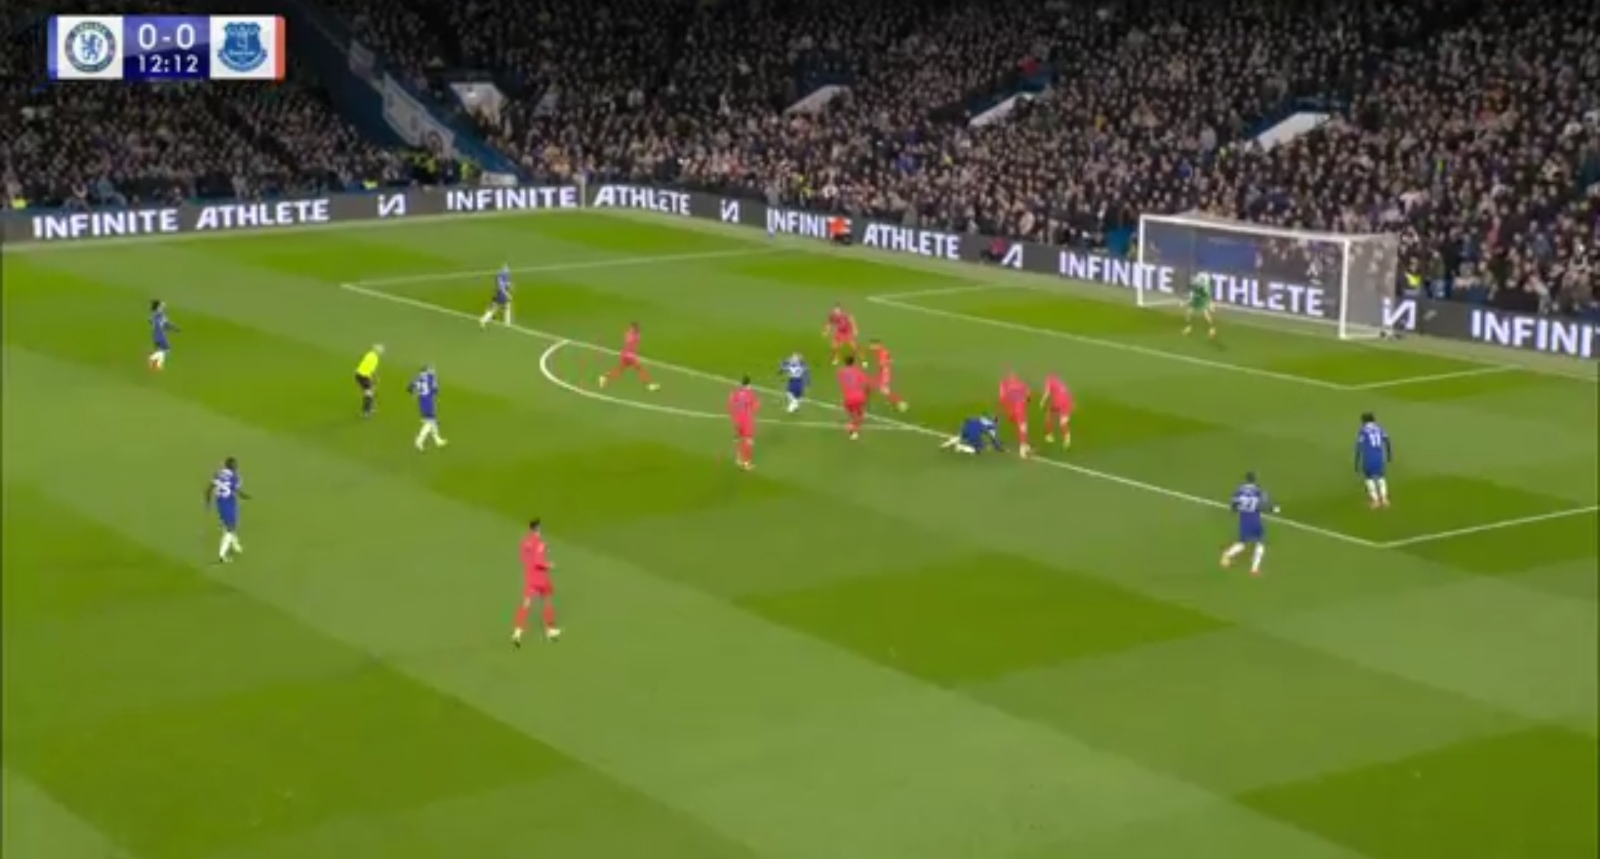 Watch: Cole Palmer nutmegs Everton player and finishes it off in style – Chelsea lead Everton